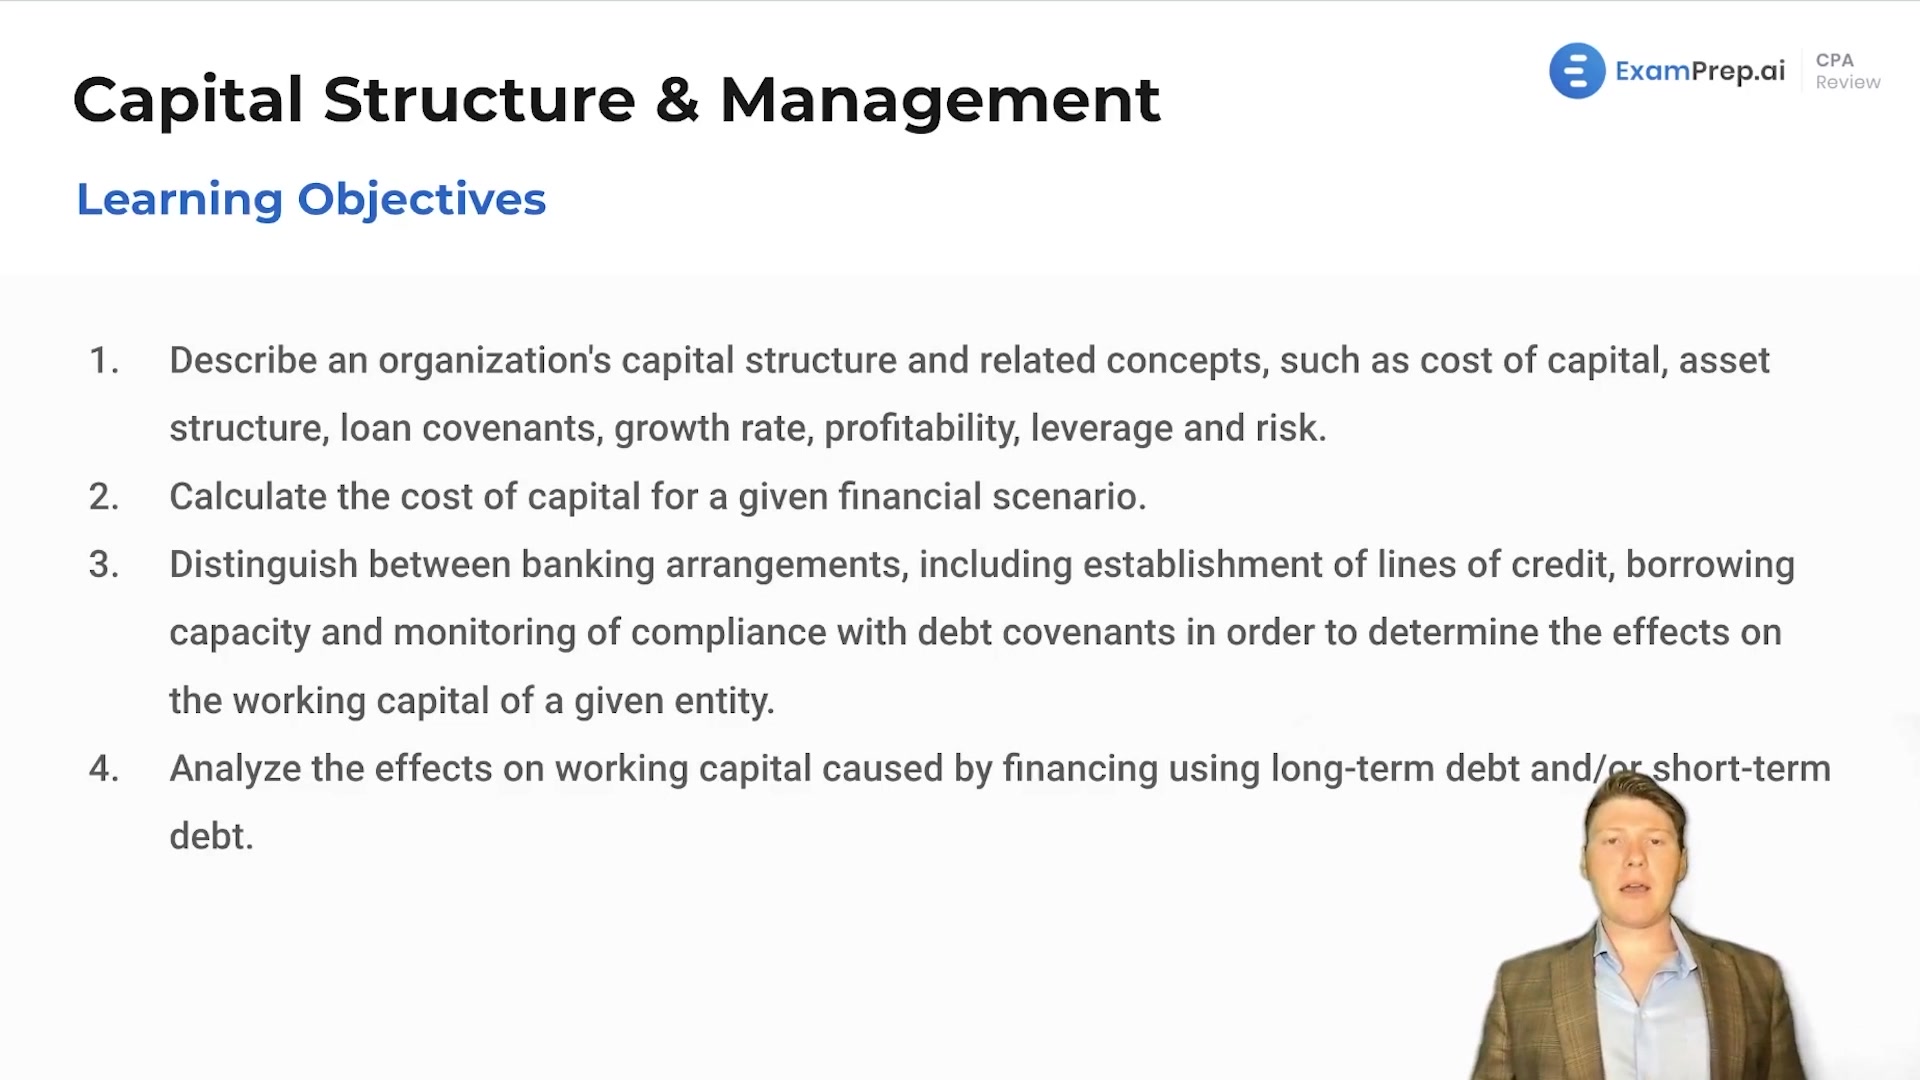 Capital Structure and Management Overview and Objectives lesson thumbnail